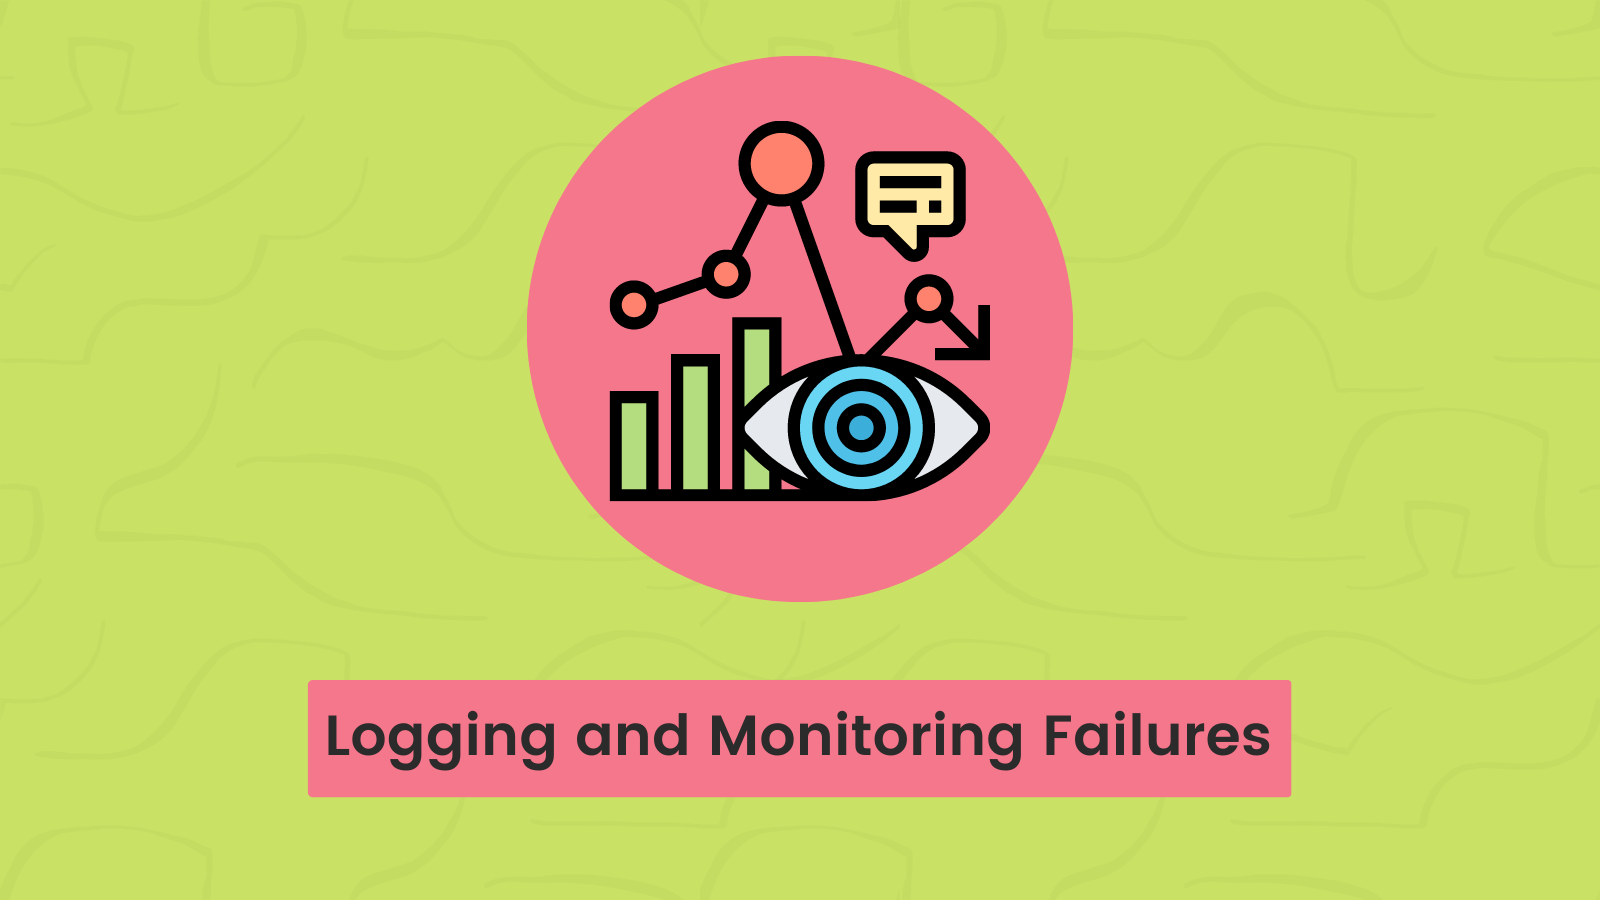 OWASP 10 - Security Logging and Monitoring Failures